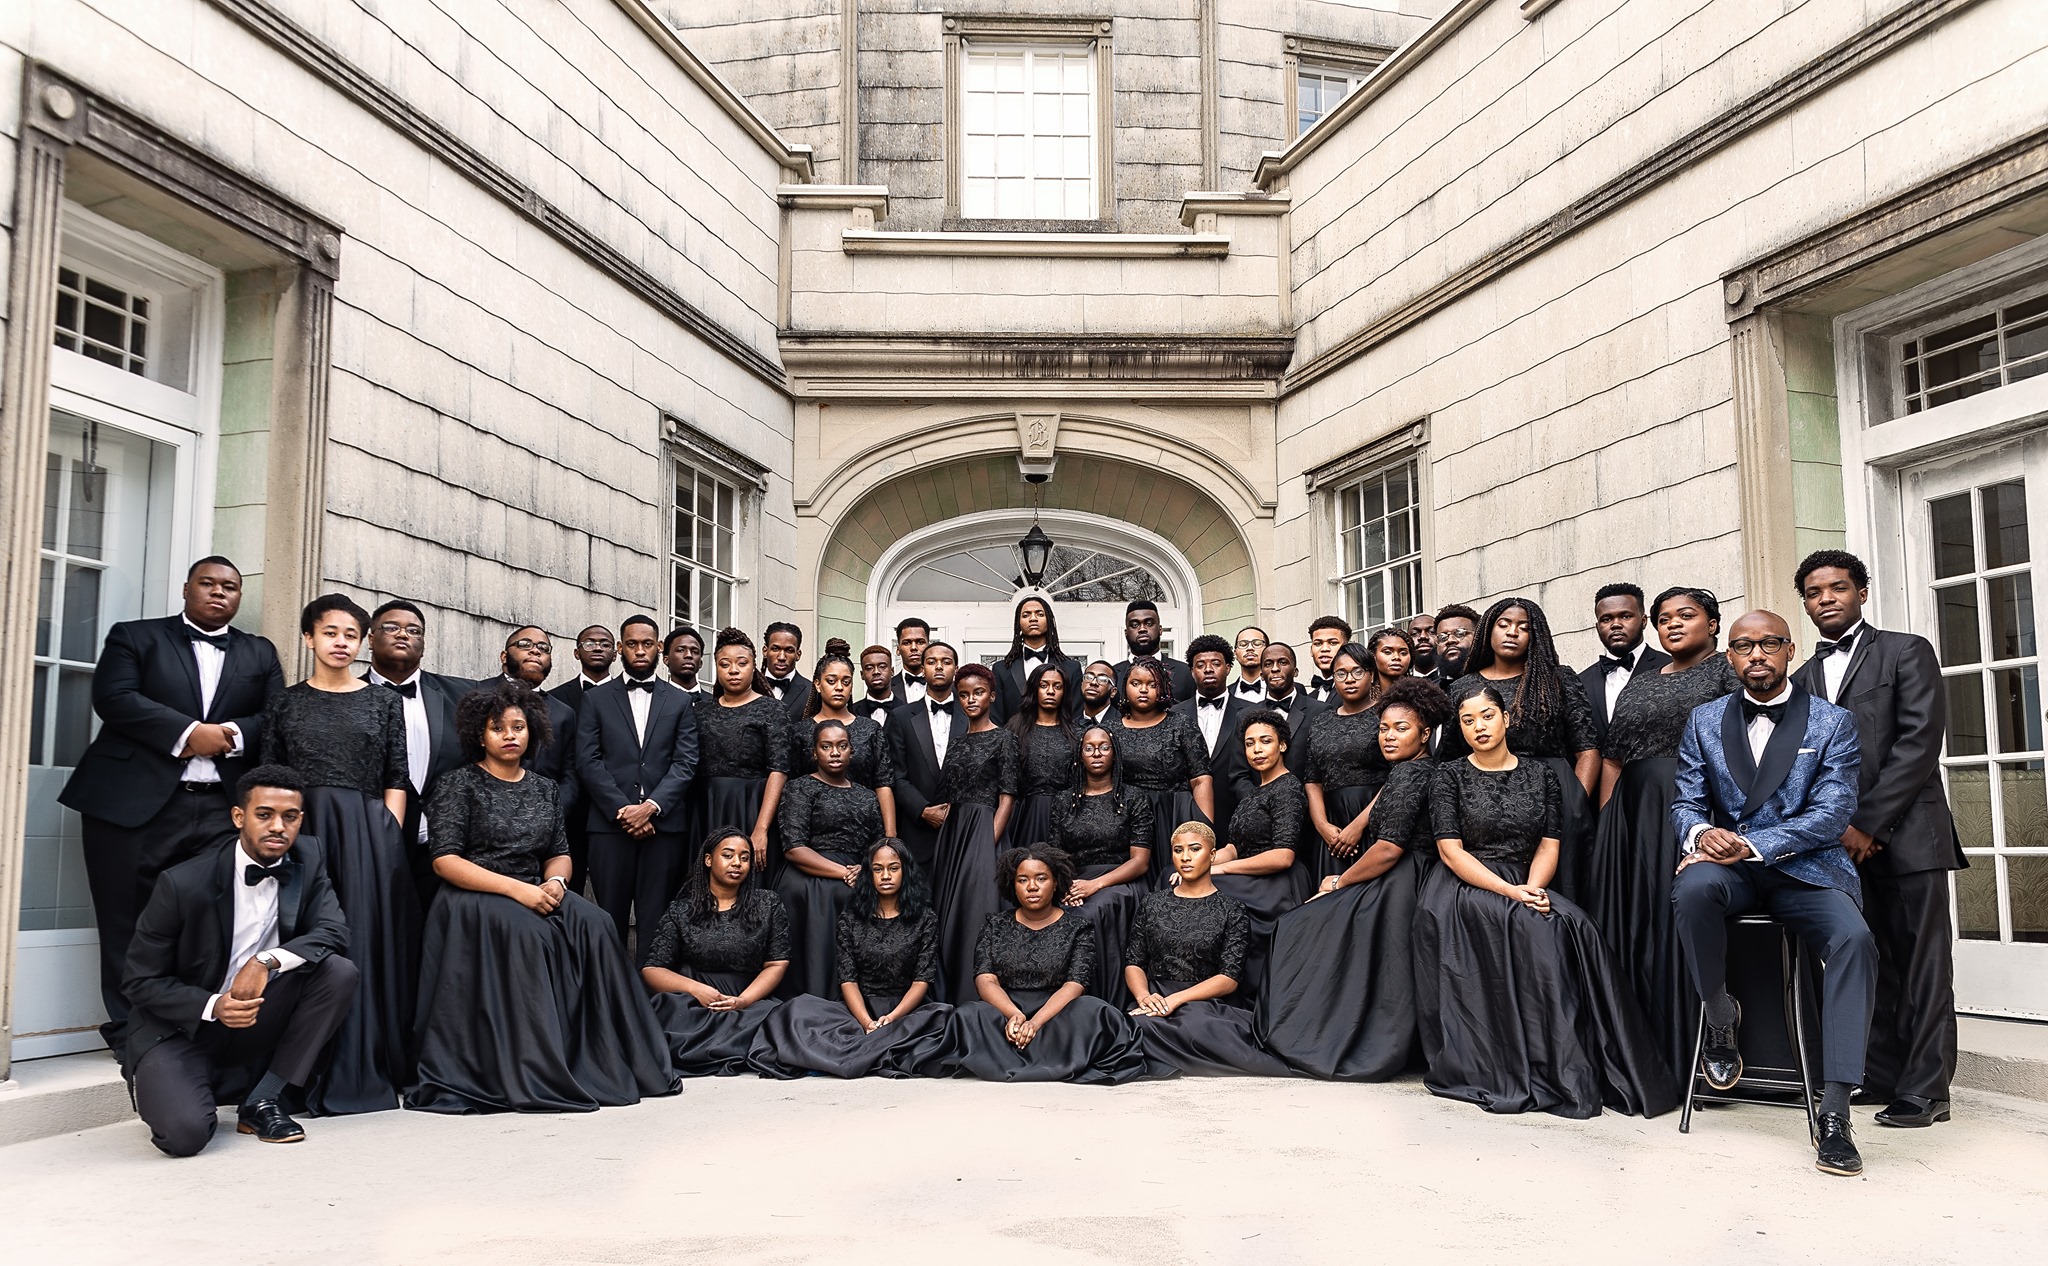 Aeolians at FPC – Tuesday, March 3 at 7 PM